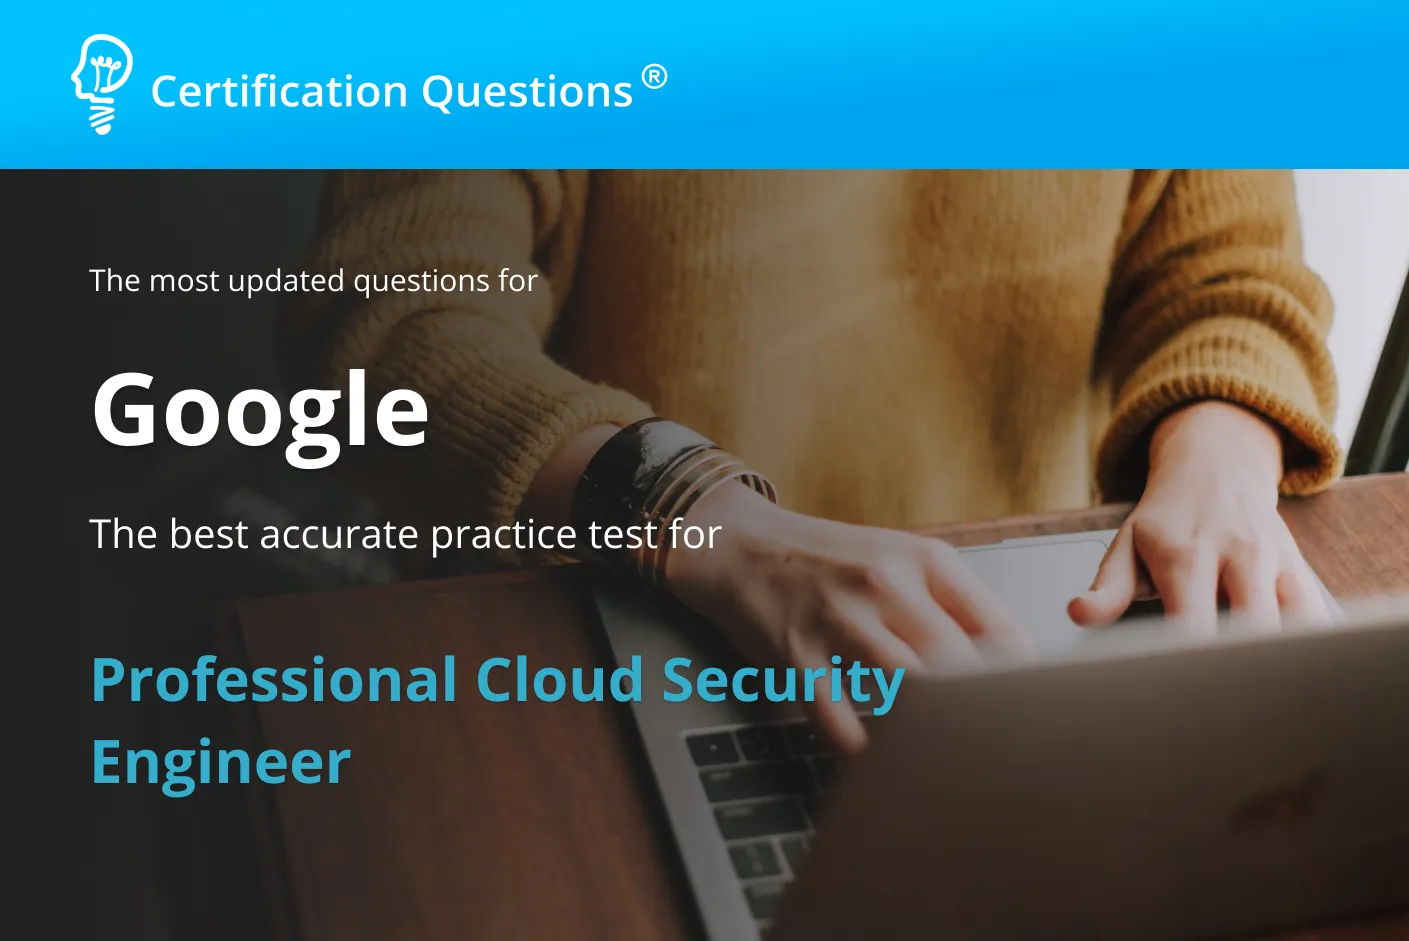 This image is related to professional cloud security engineer exam questions